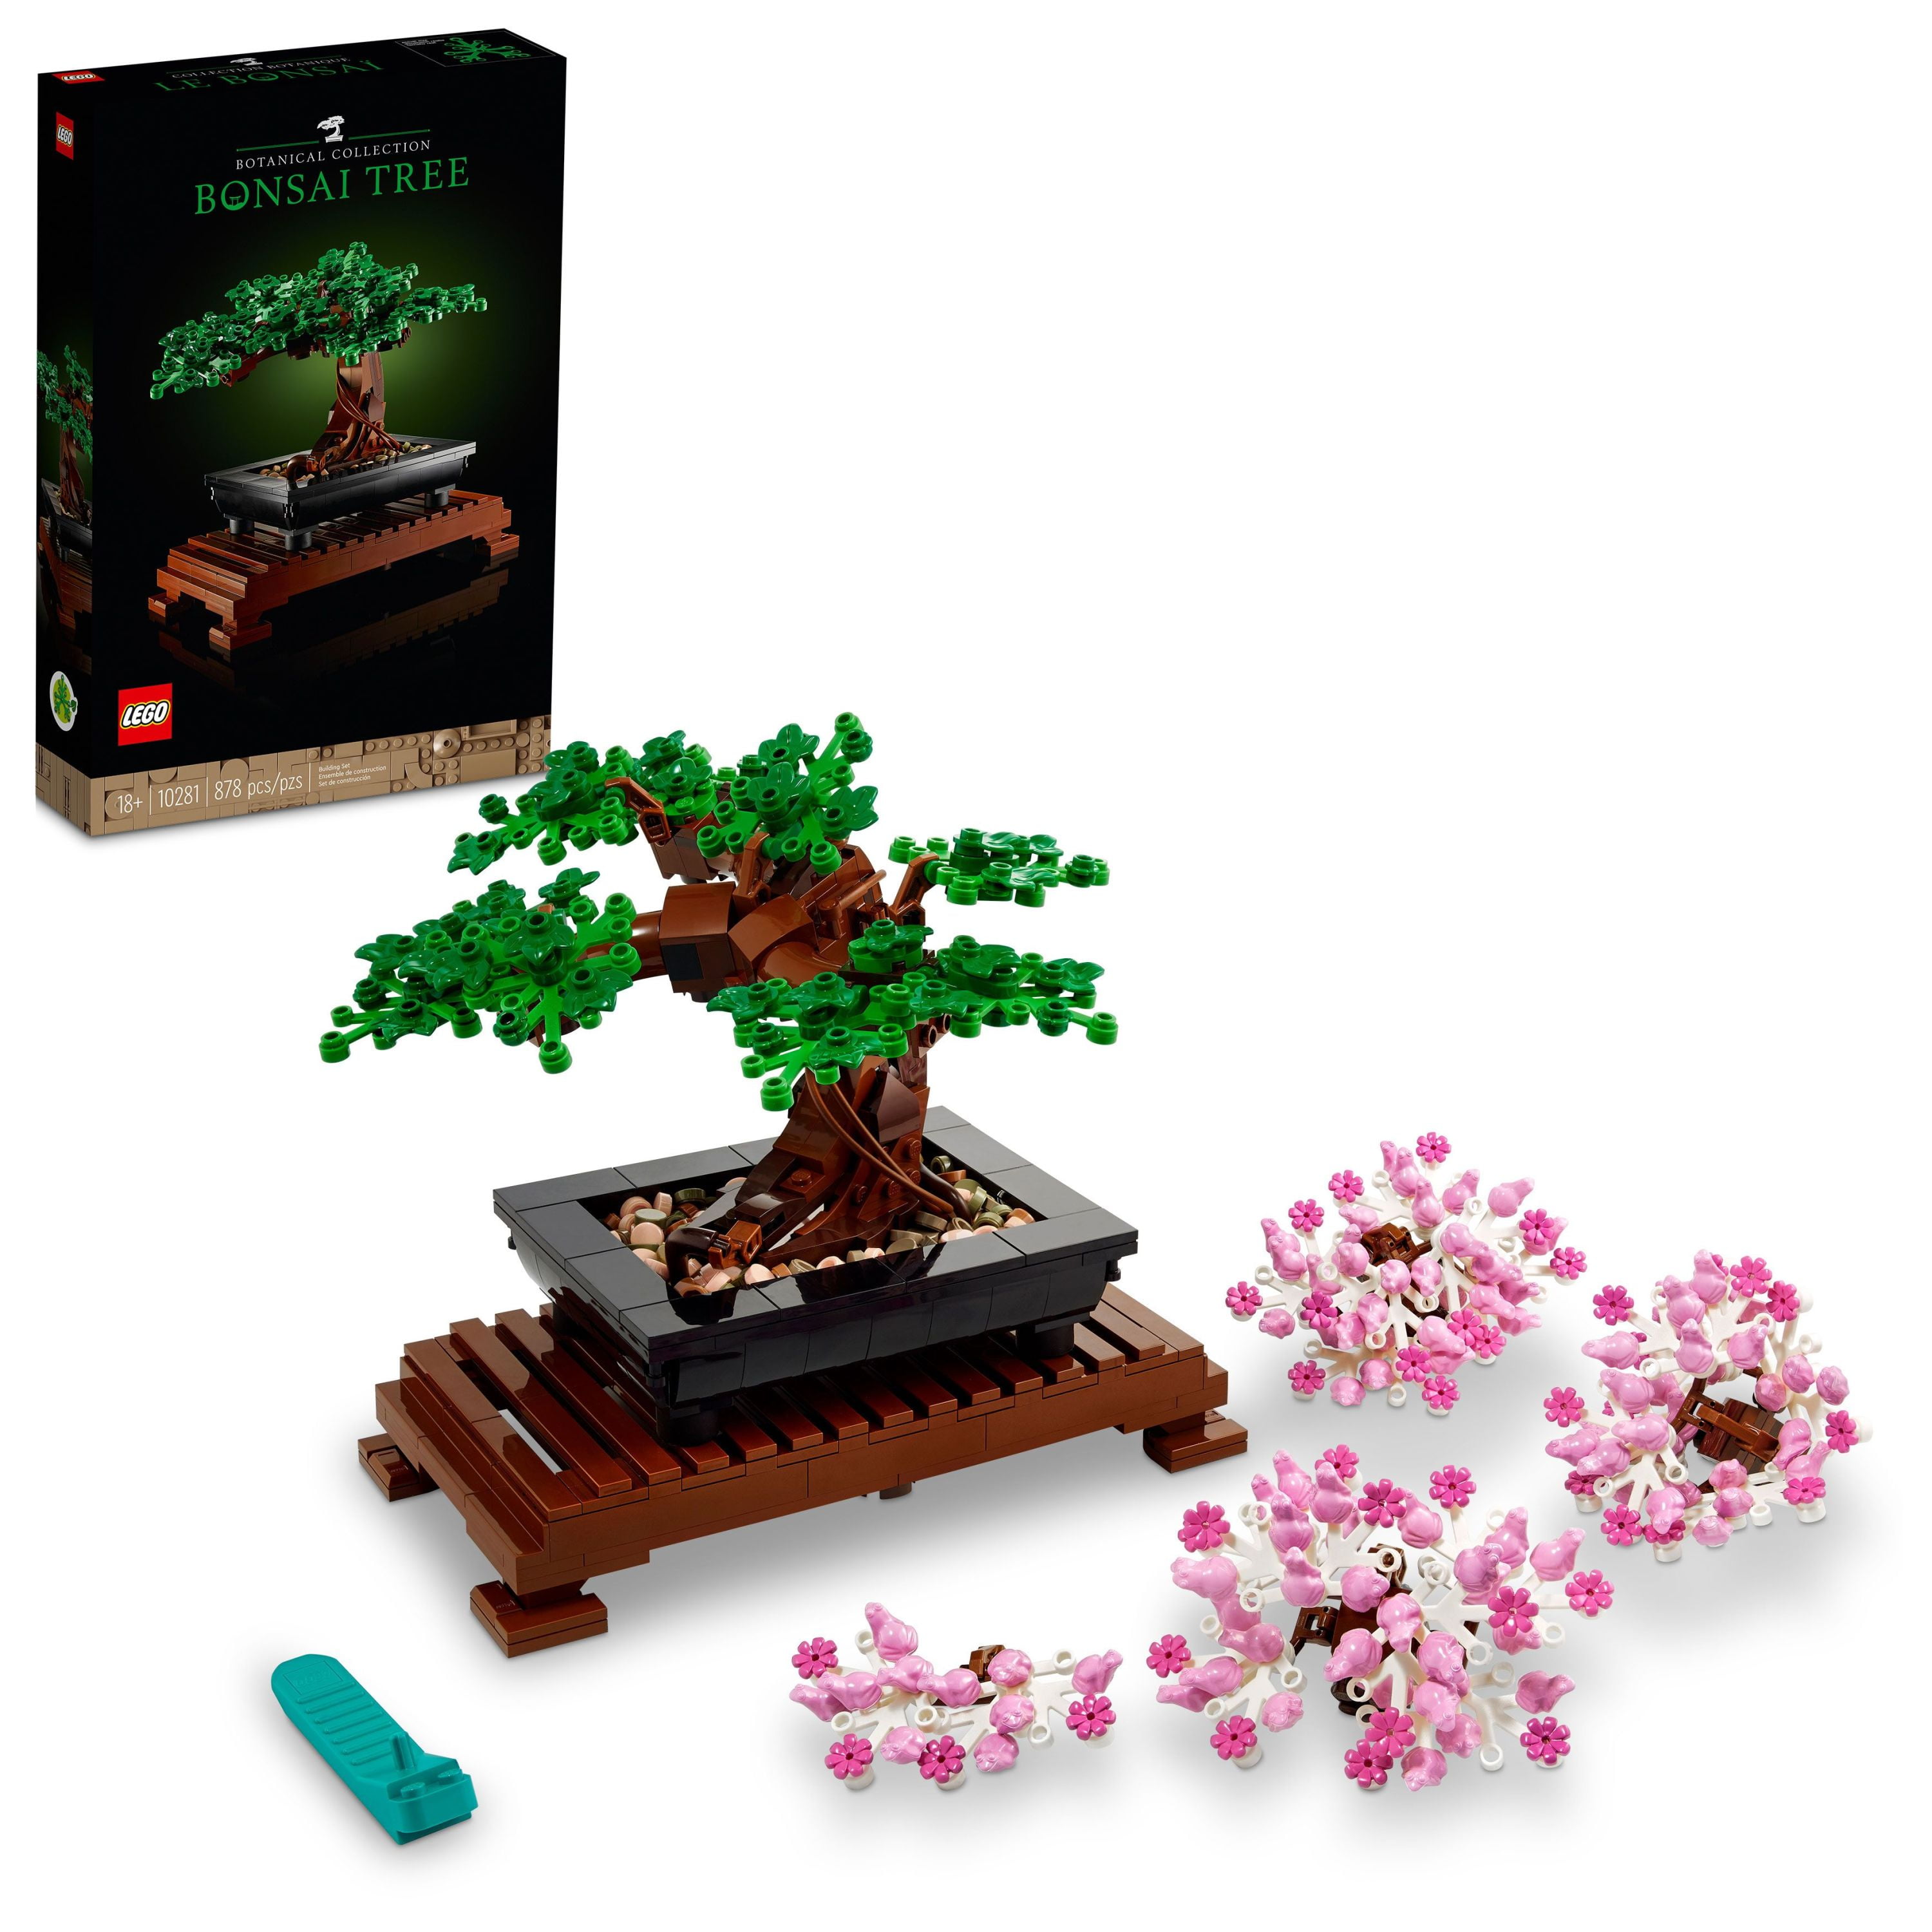 LEGO Icons Bonsai Tree 10281 Building Set for Adults, Plants Home Dcor, DIY Projects, Creative Activity Birthday or Anniversary Gift for him or her, Botanical Collection